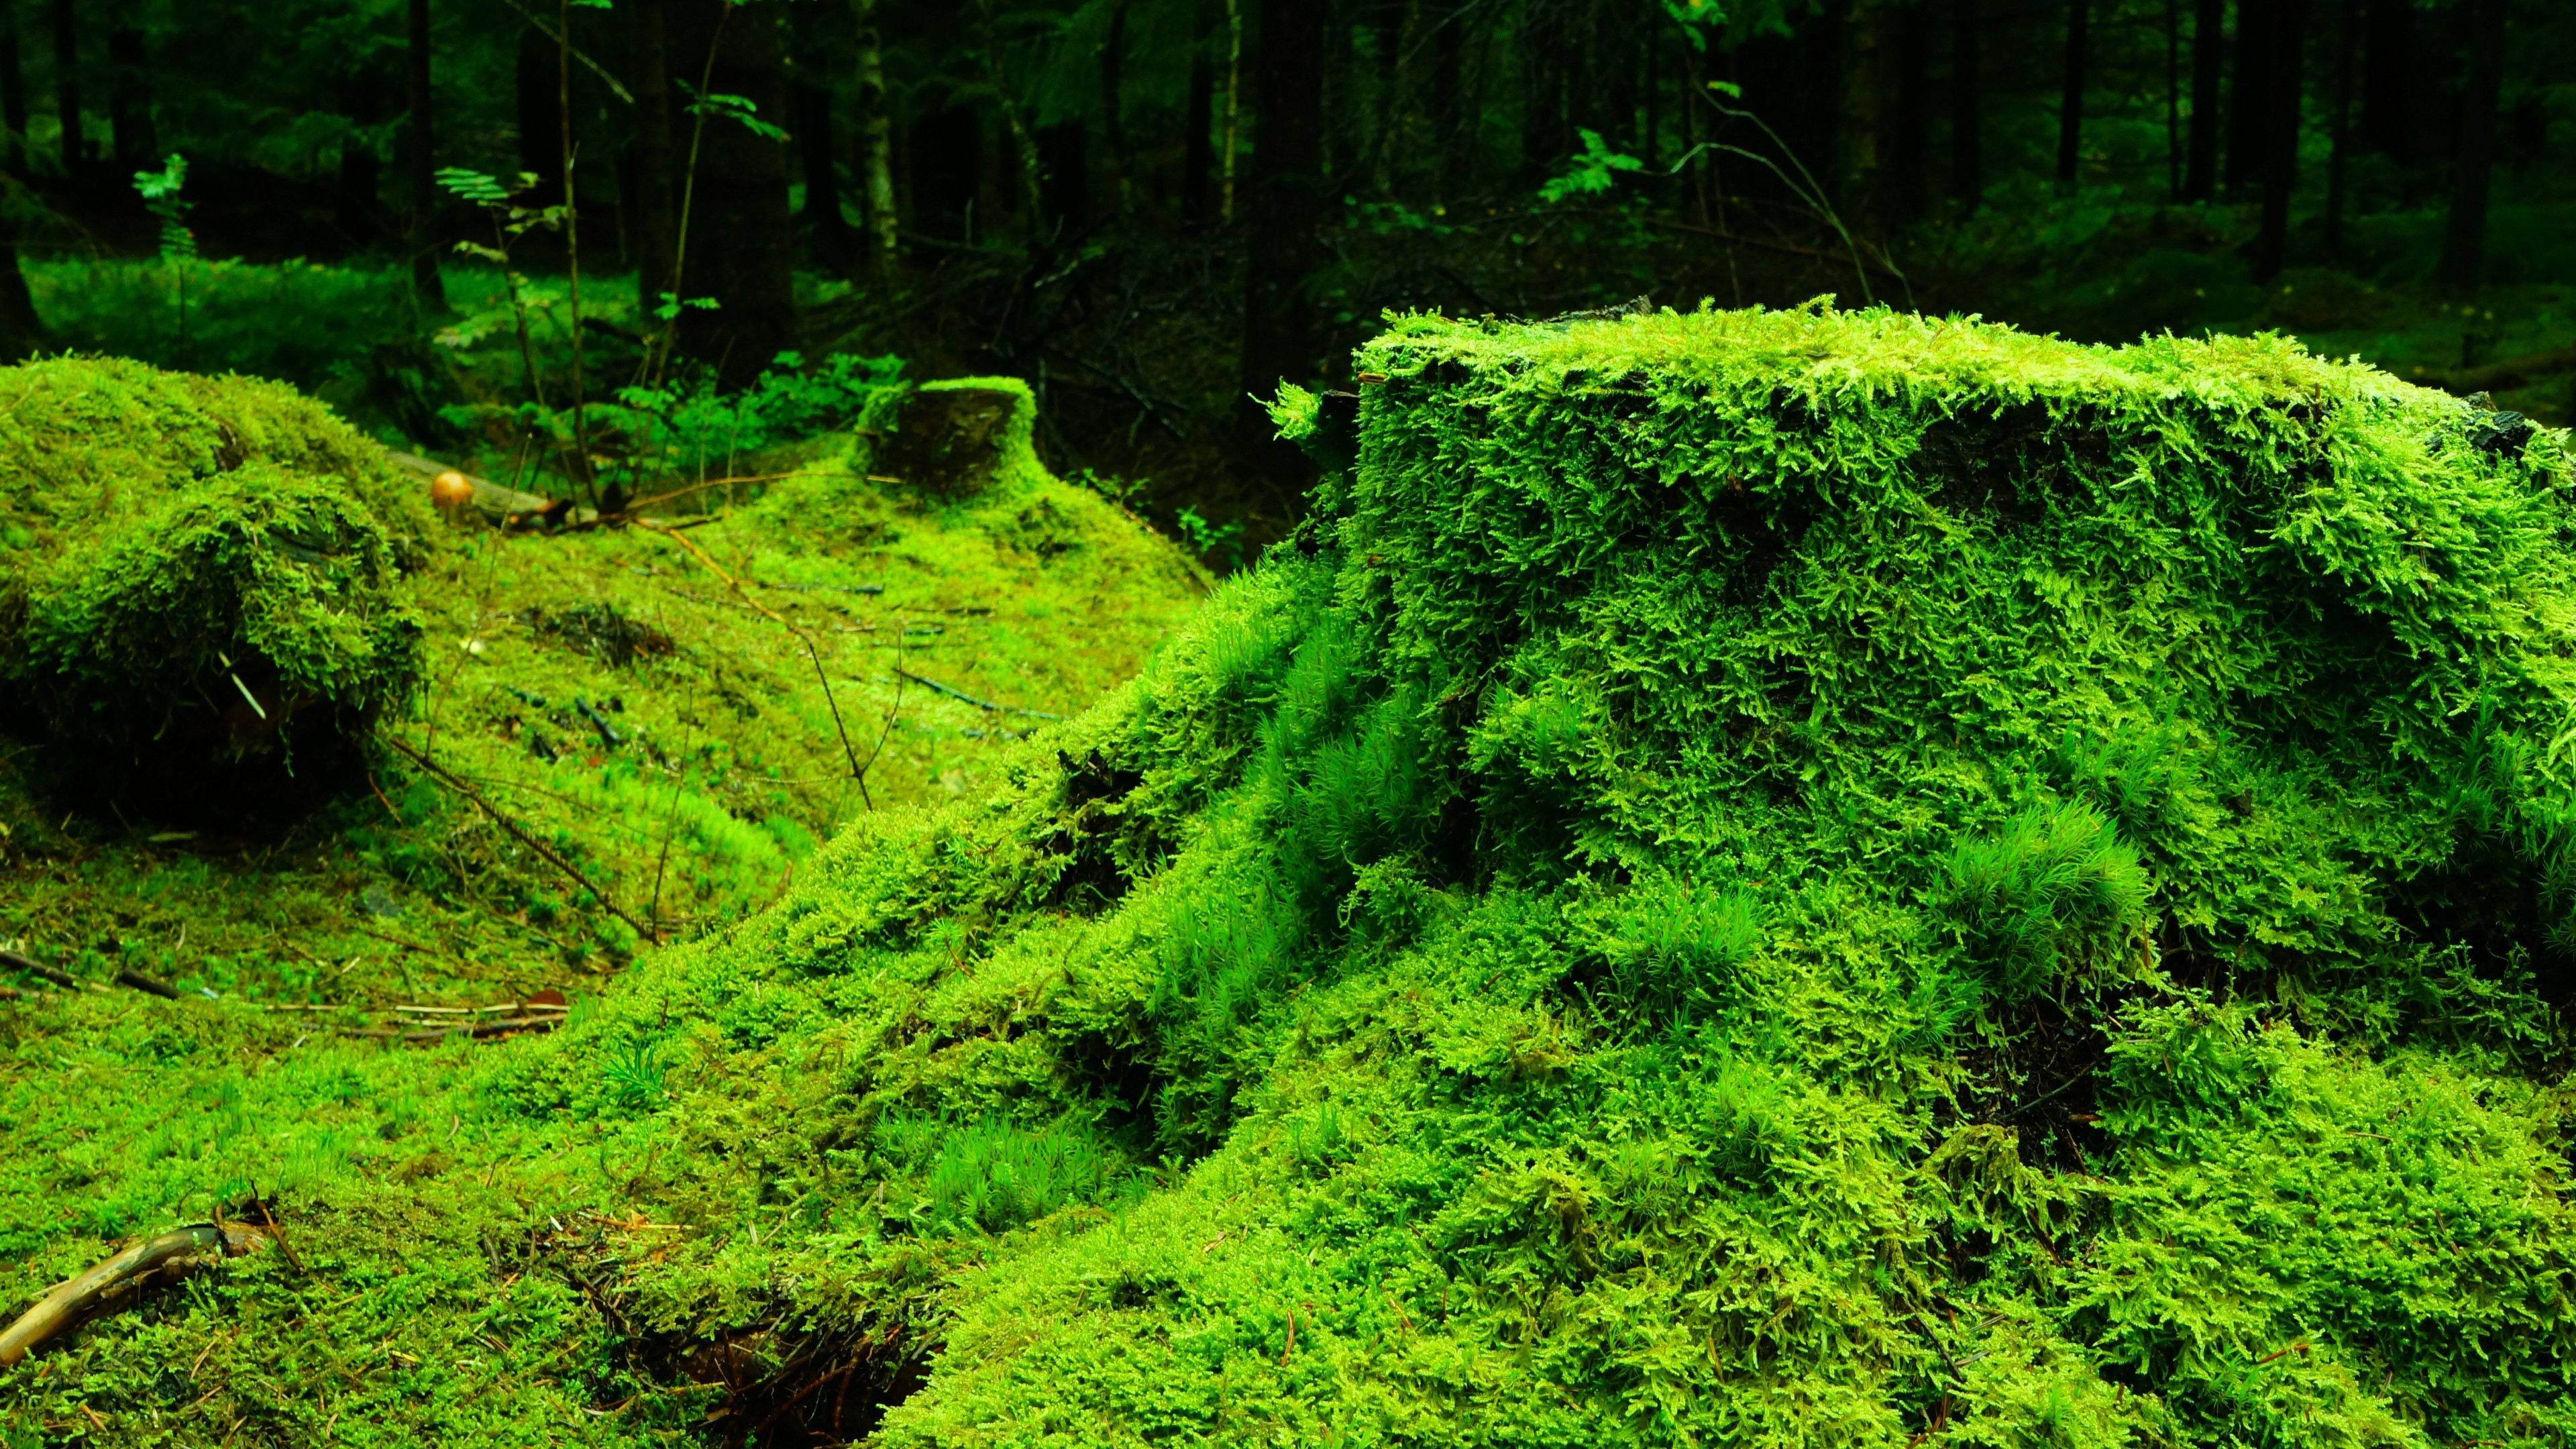 General 3840x2160 nature moss plants forest trees leaves wood